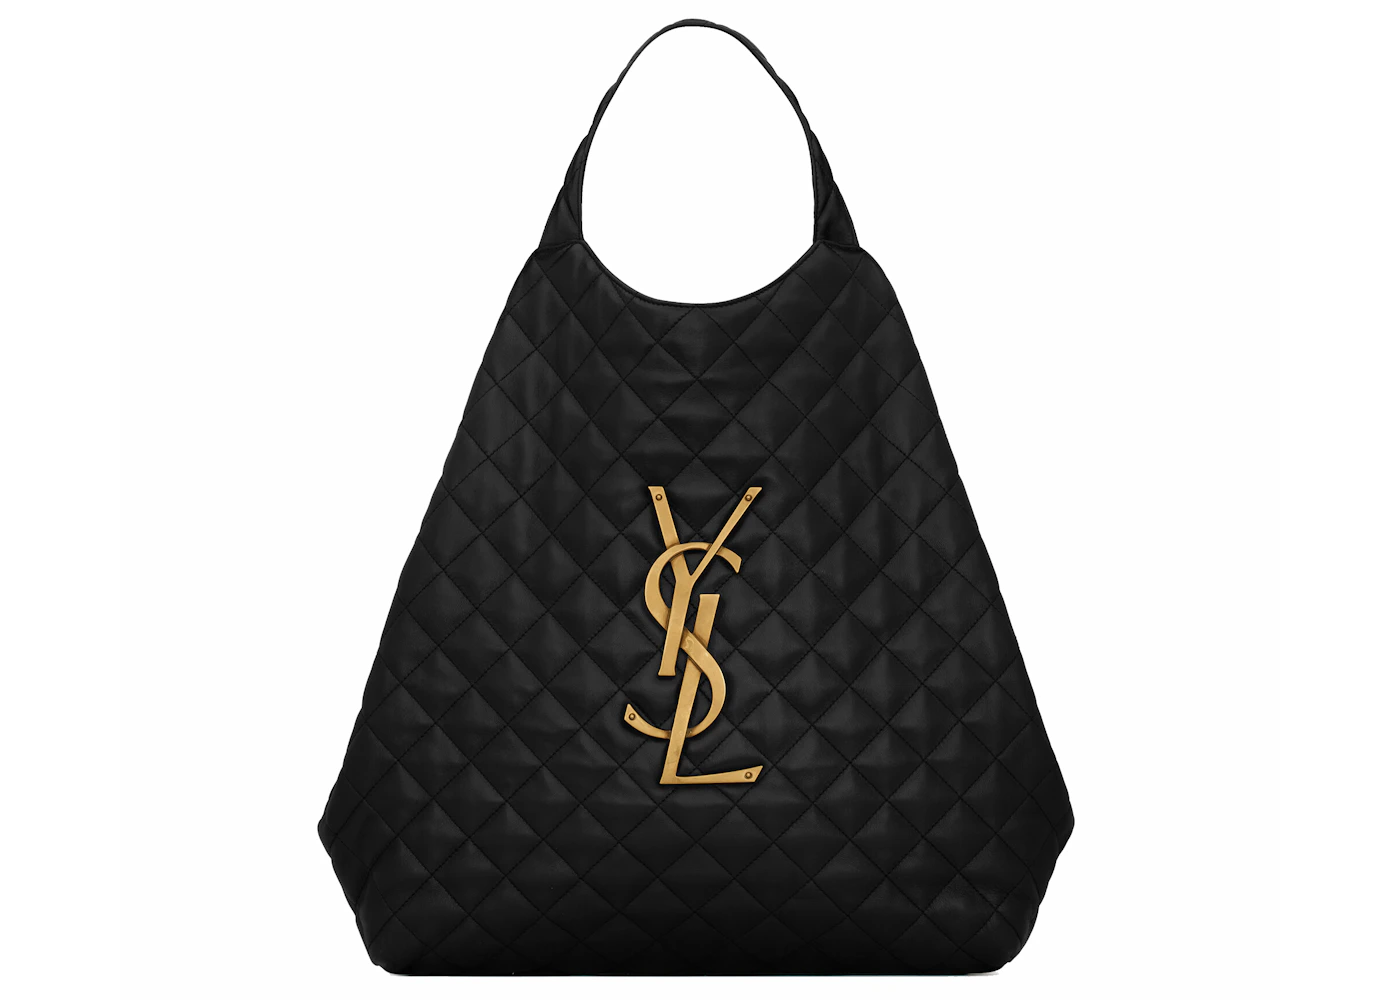 Saint Laurent Icare Maxi Shopping Bag Quilted Lambskin Black in